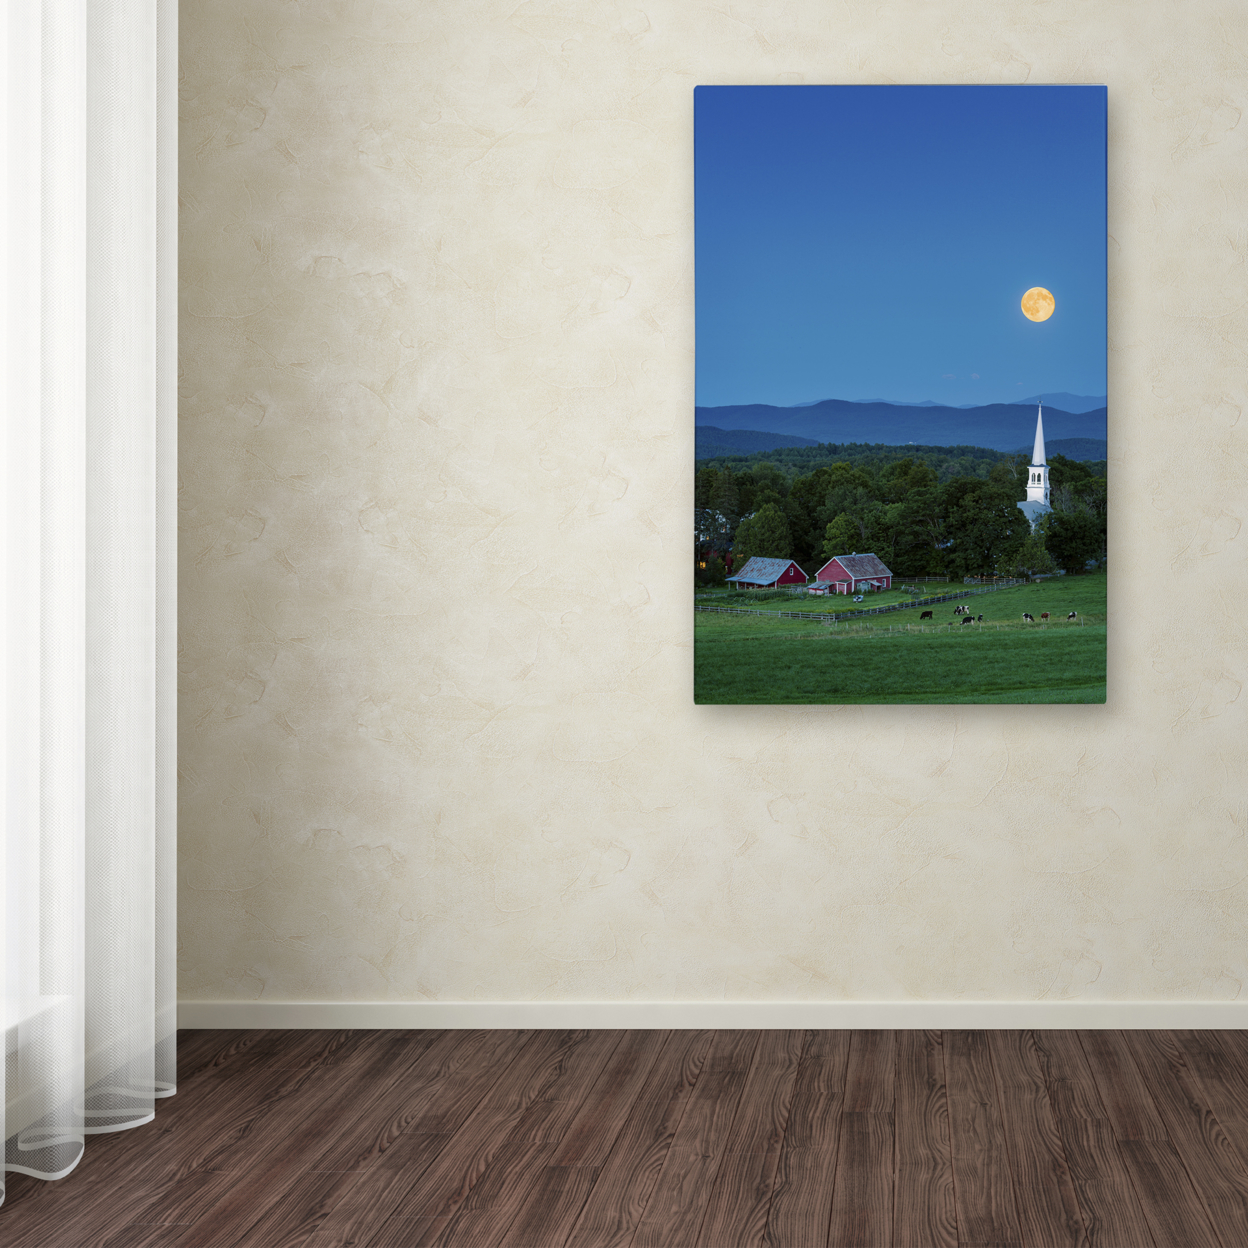 Michael Blanchette Photography 'Pointing At Moon' Canvas Art 16 X 24